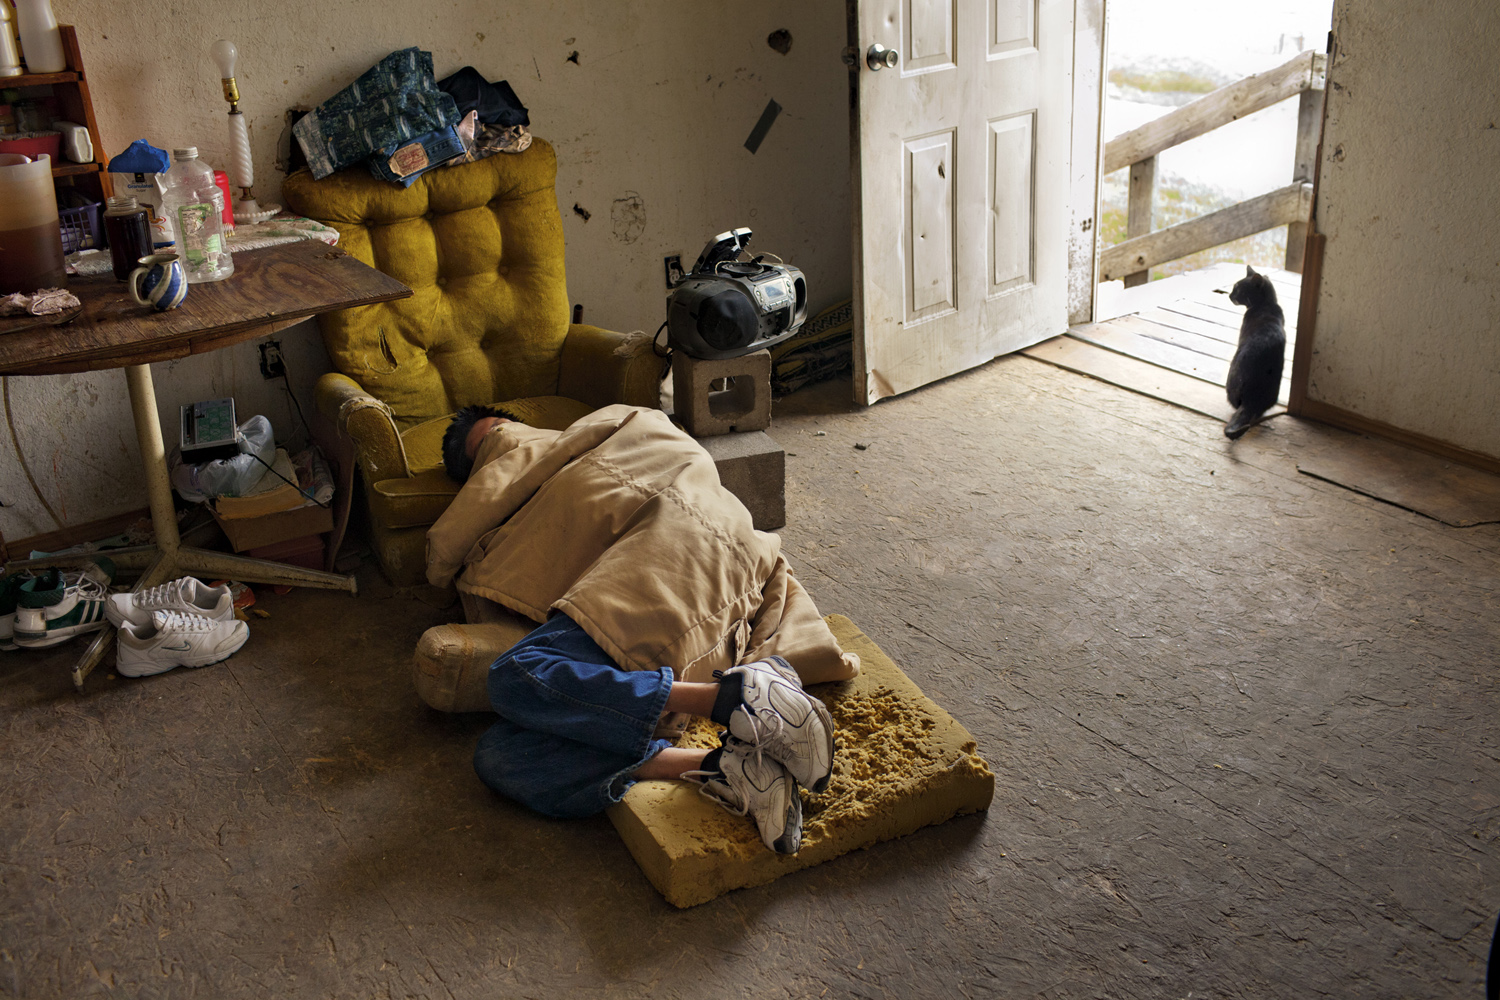 PRINT A young man suffering from the effects of a neurological disease and alcoholism sleeps in the living room of his home, six miles from the nearest town. Since the photograph was made, in May 2011, the house has been condemned, and he and the other occupants have moved elsewhere.